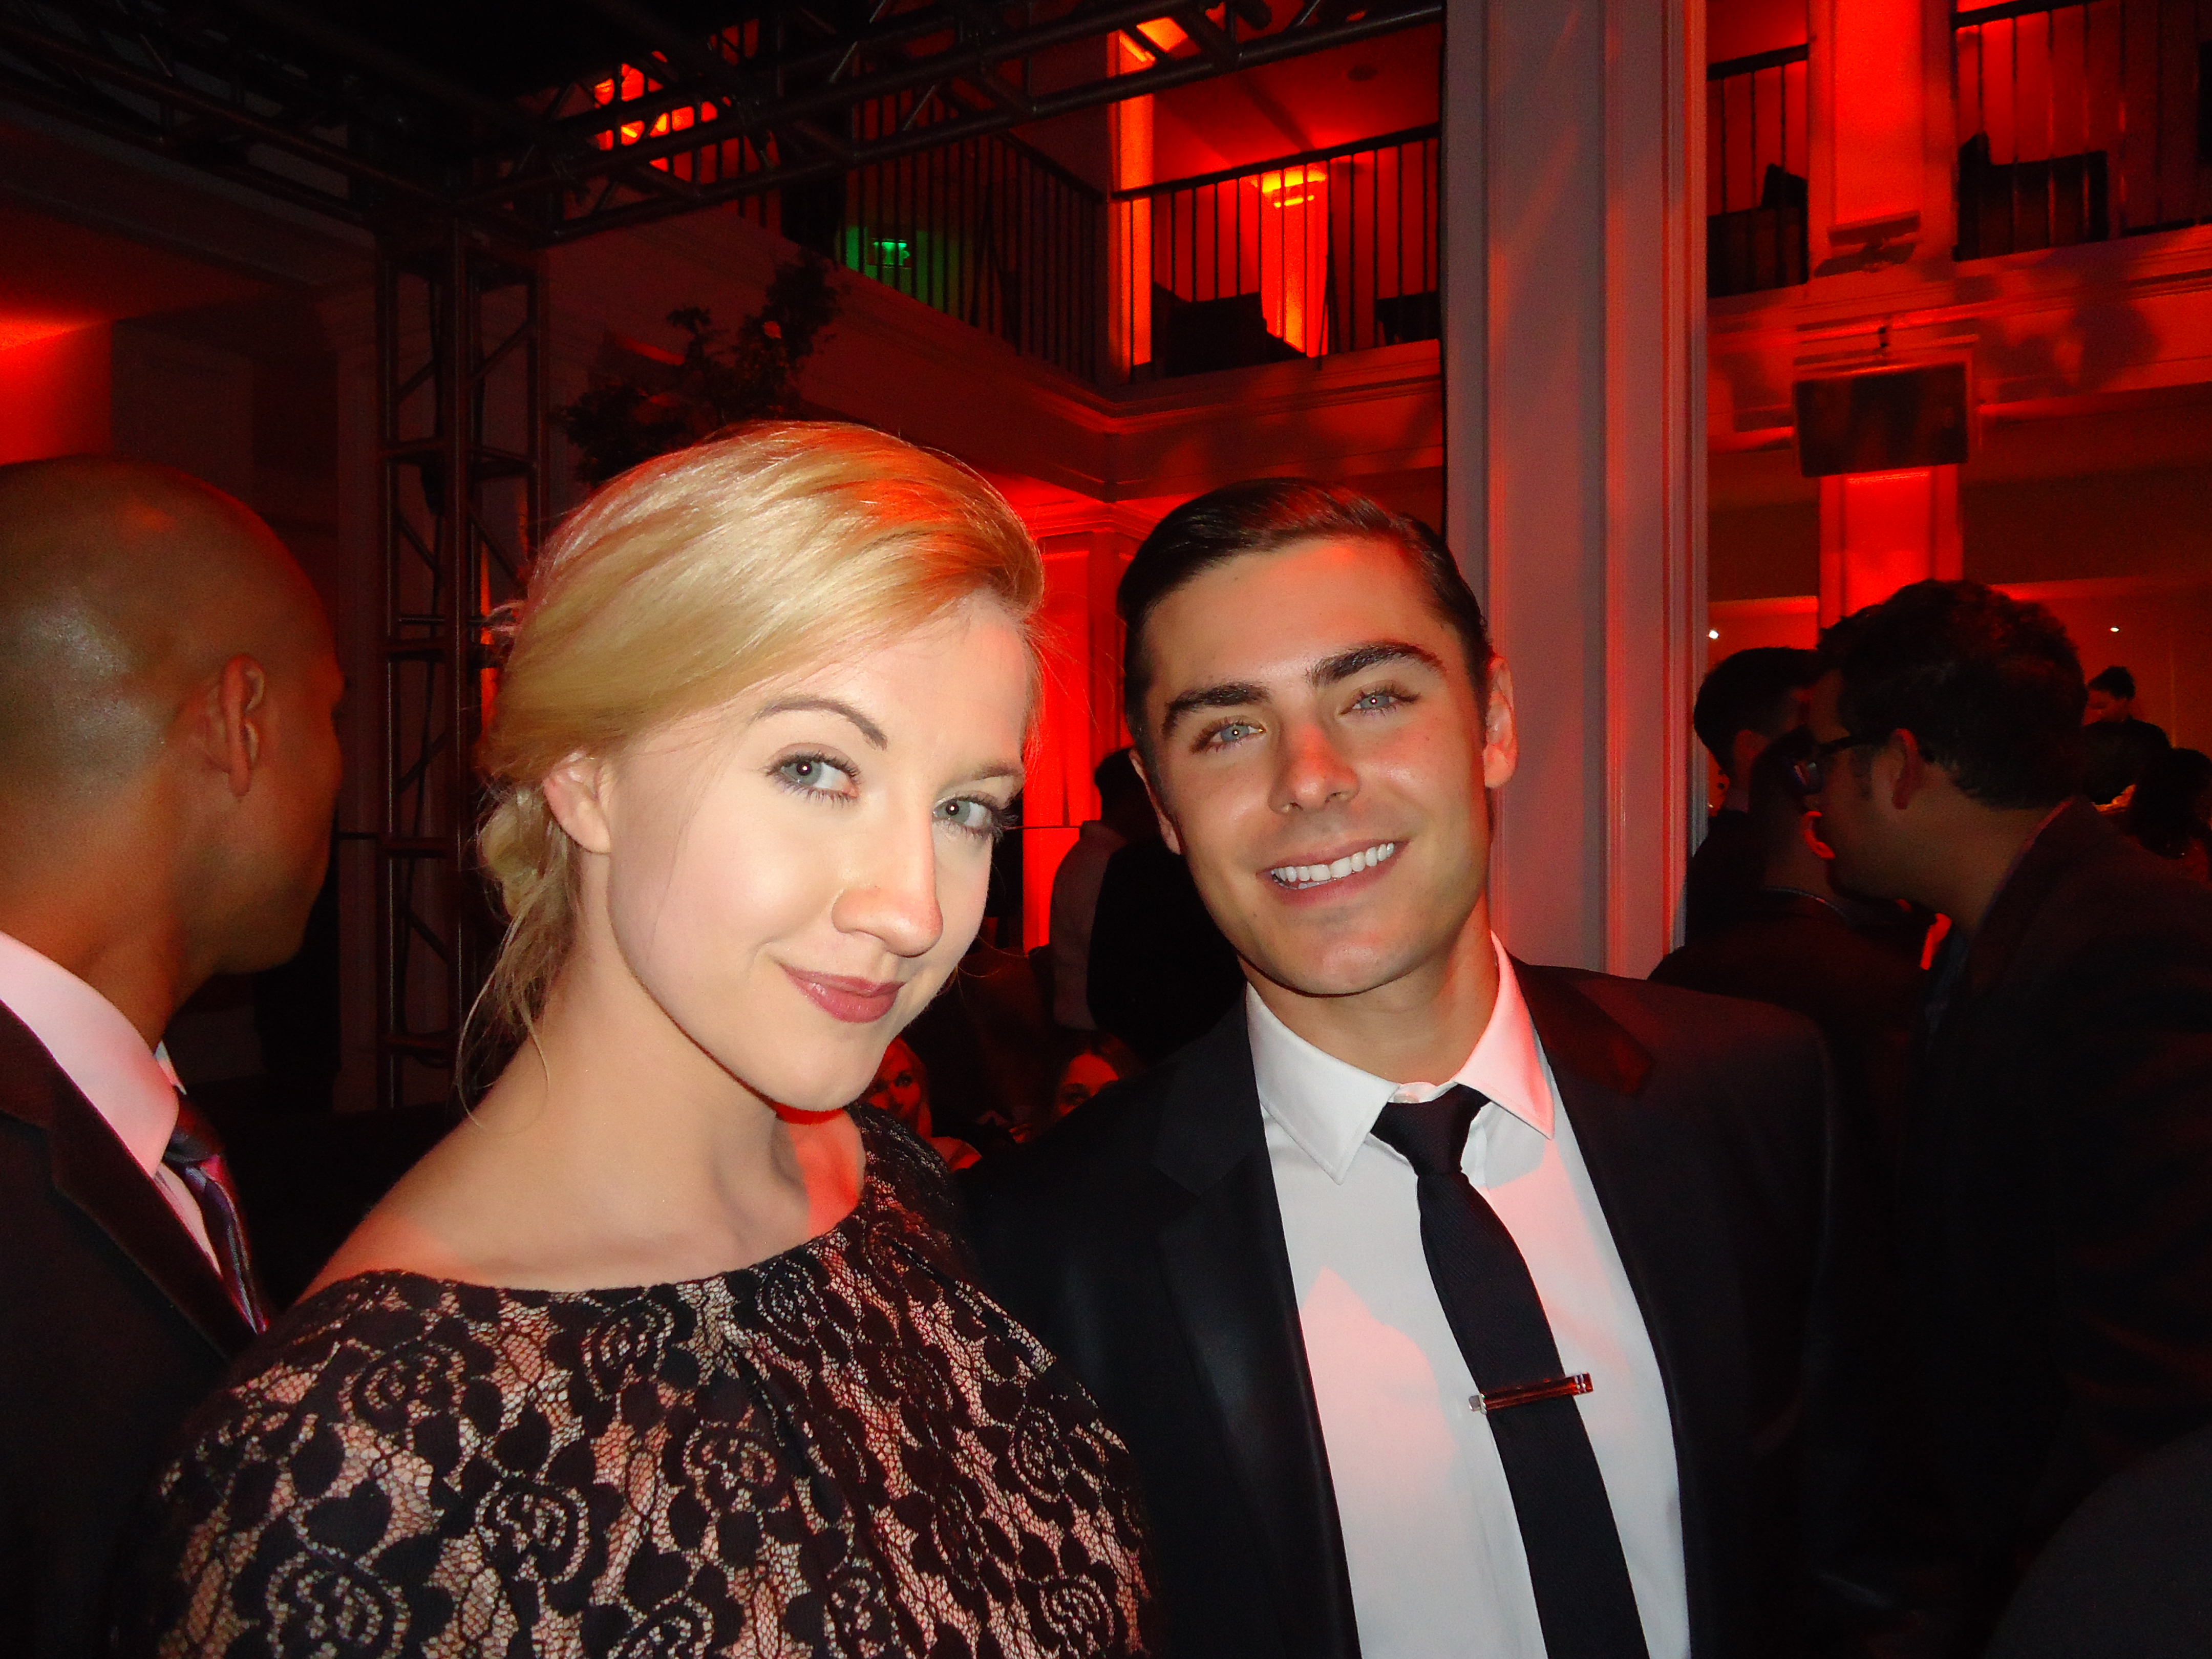 Laura Linda Bradley and Zac Efron at The Lucky One LA premier.